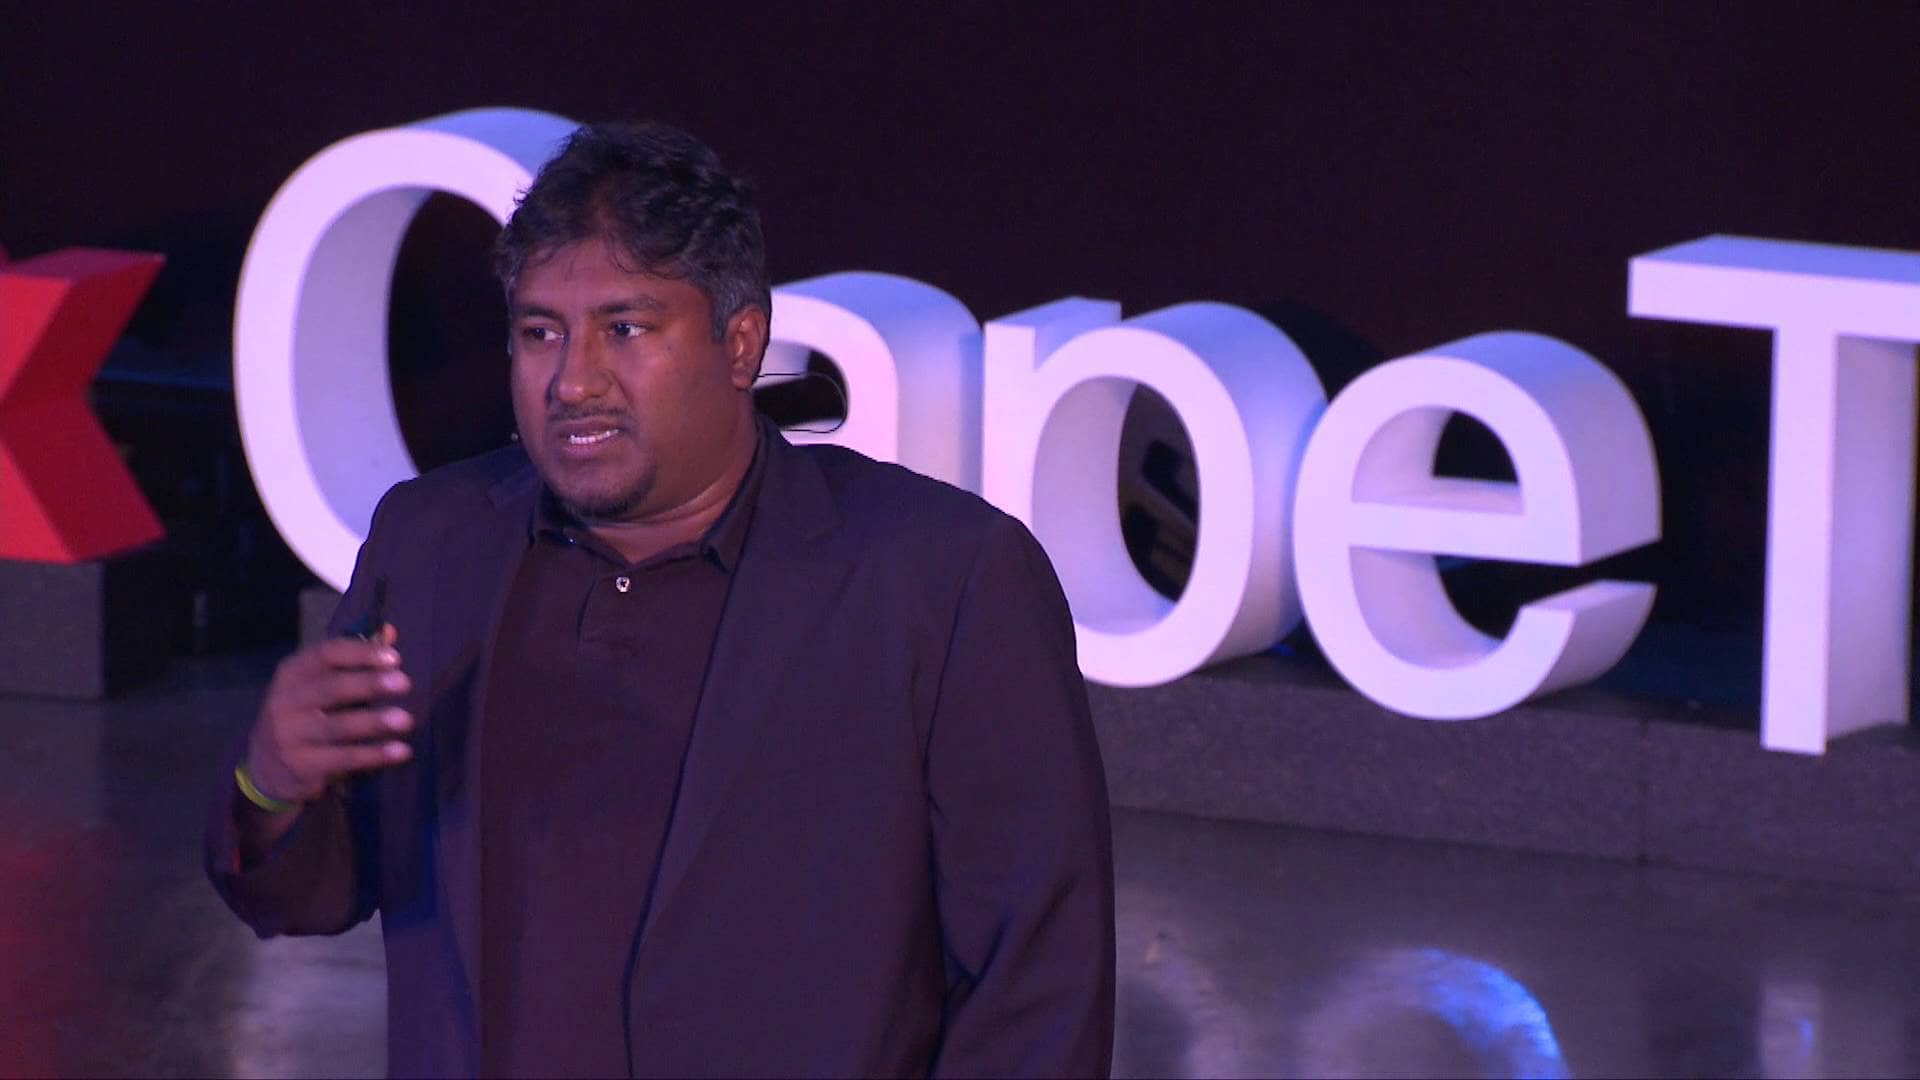 The future of Bitcoin by Vinny Lingham at TEDxCapeTown